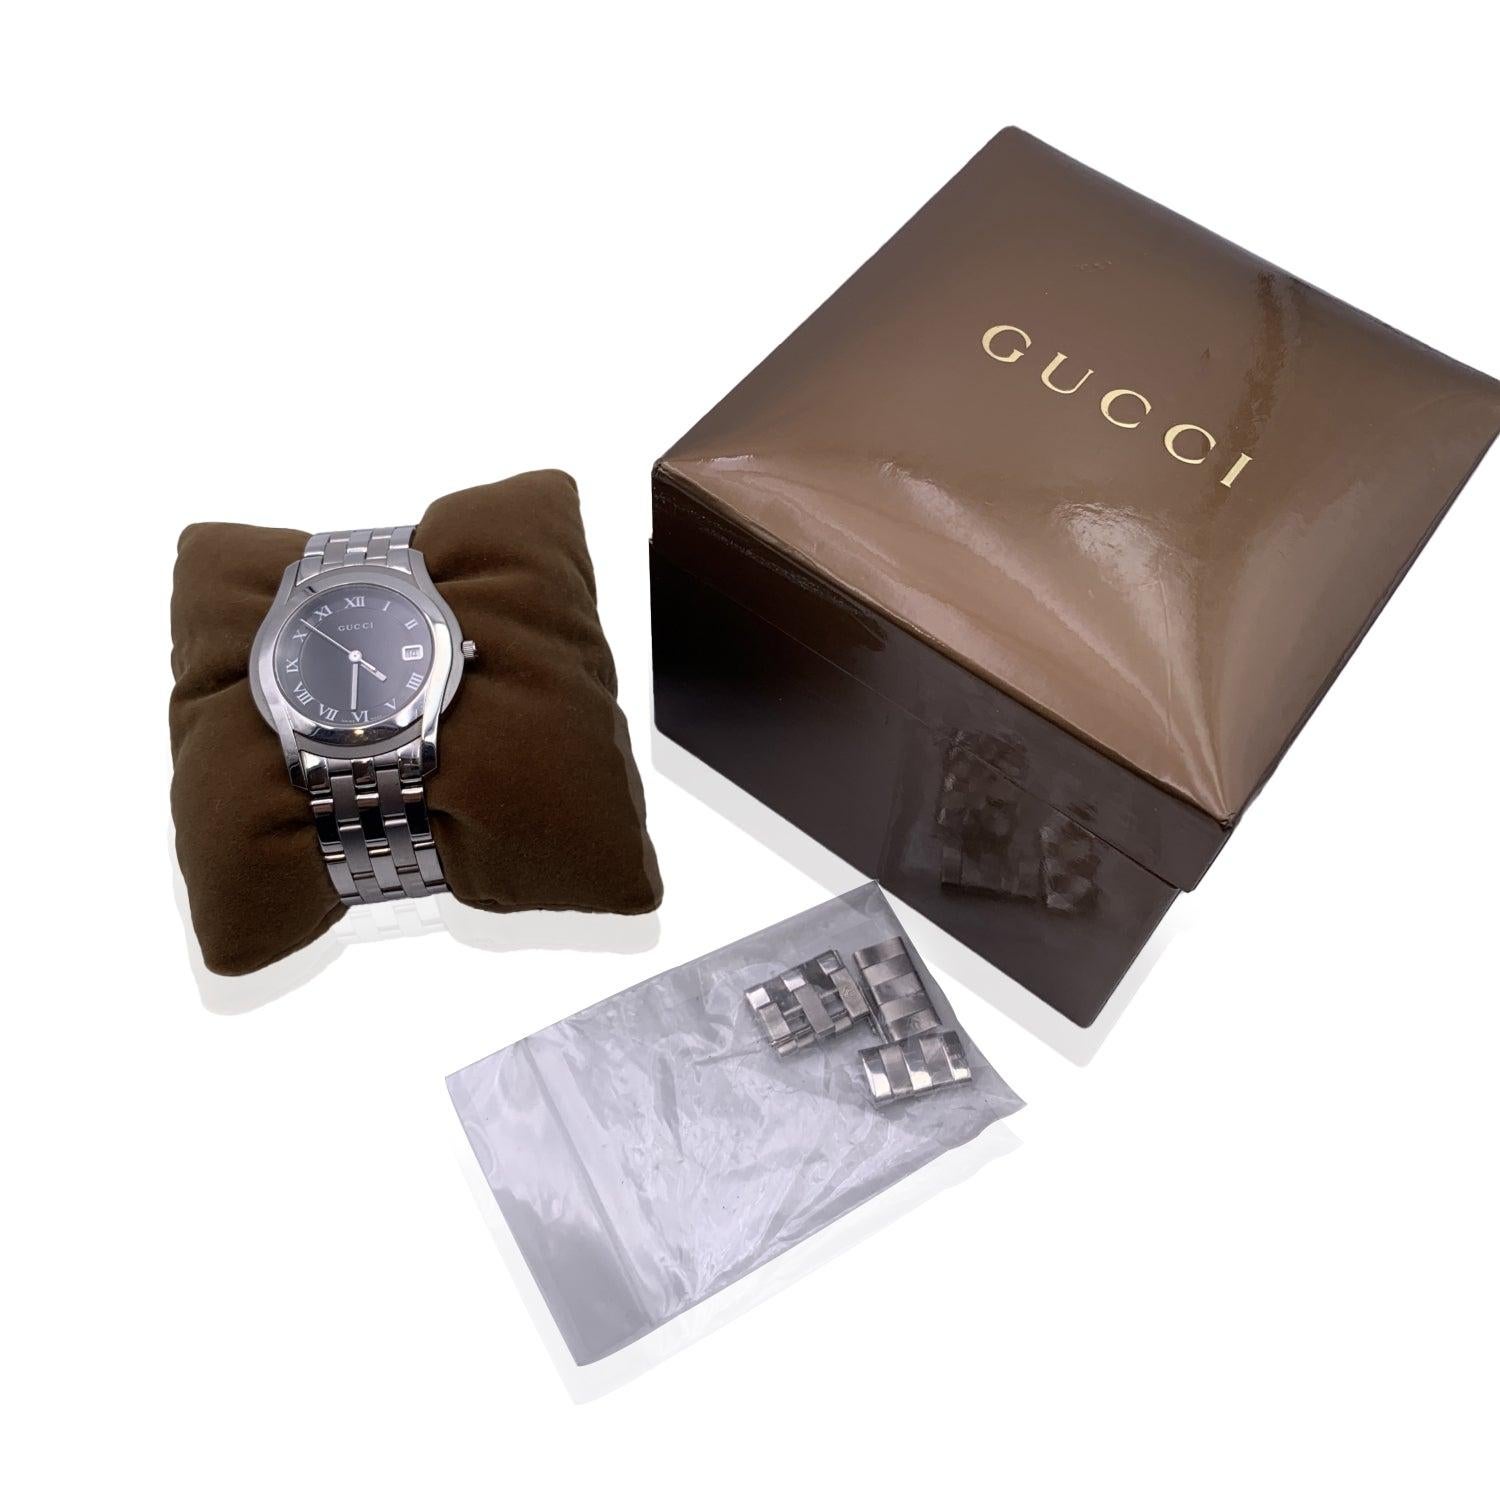 Gucci silver tone stainless steel wrist watch, mod. 5500 M. Black Dial. Date at 3 o'clock. Sapphire crystal. Swiss Made Quartz movement. Gucci written on face. Roman numbers. Gucci crest on the reverse of the case. Water Resistant to 3atm. Stainless